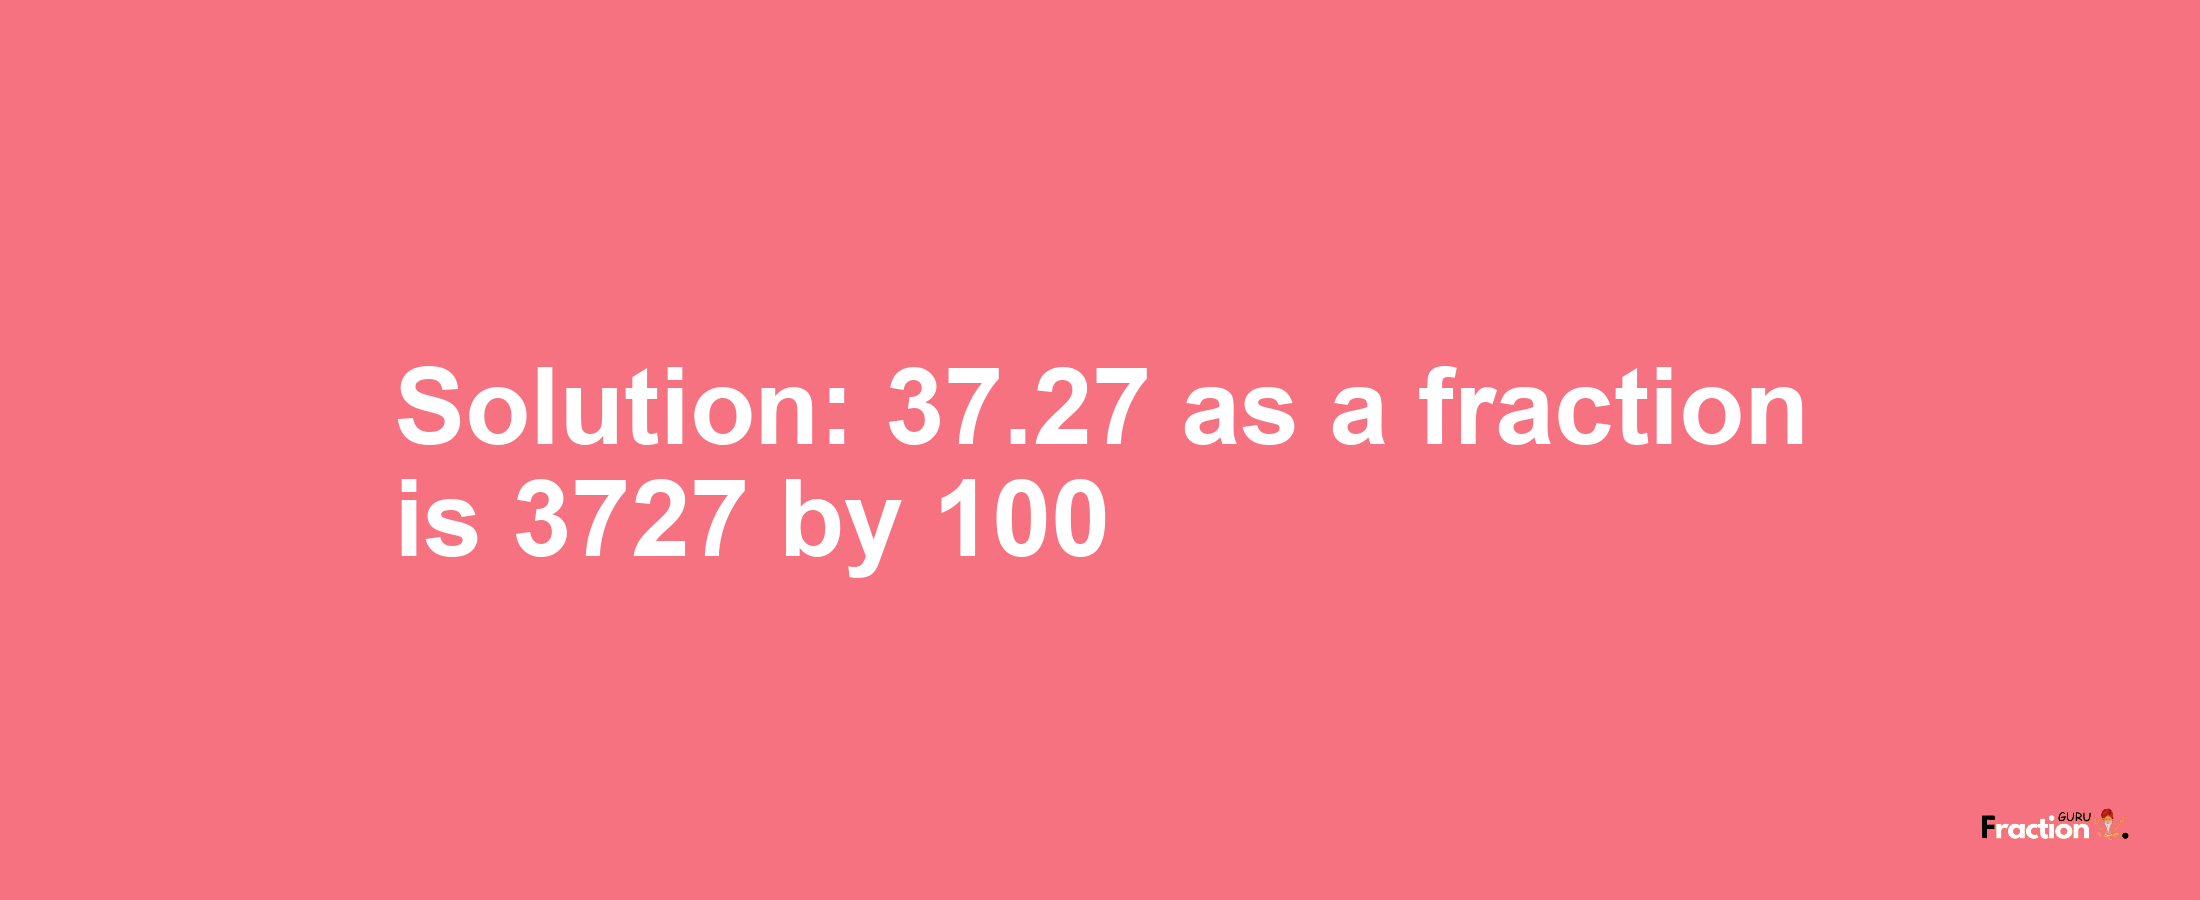 Solution:37.27 as a fraction is 3727/100